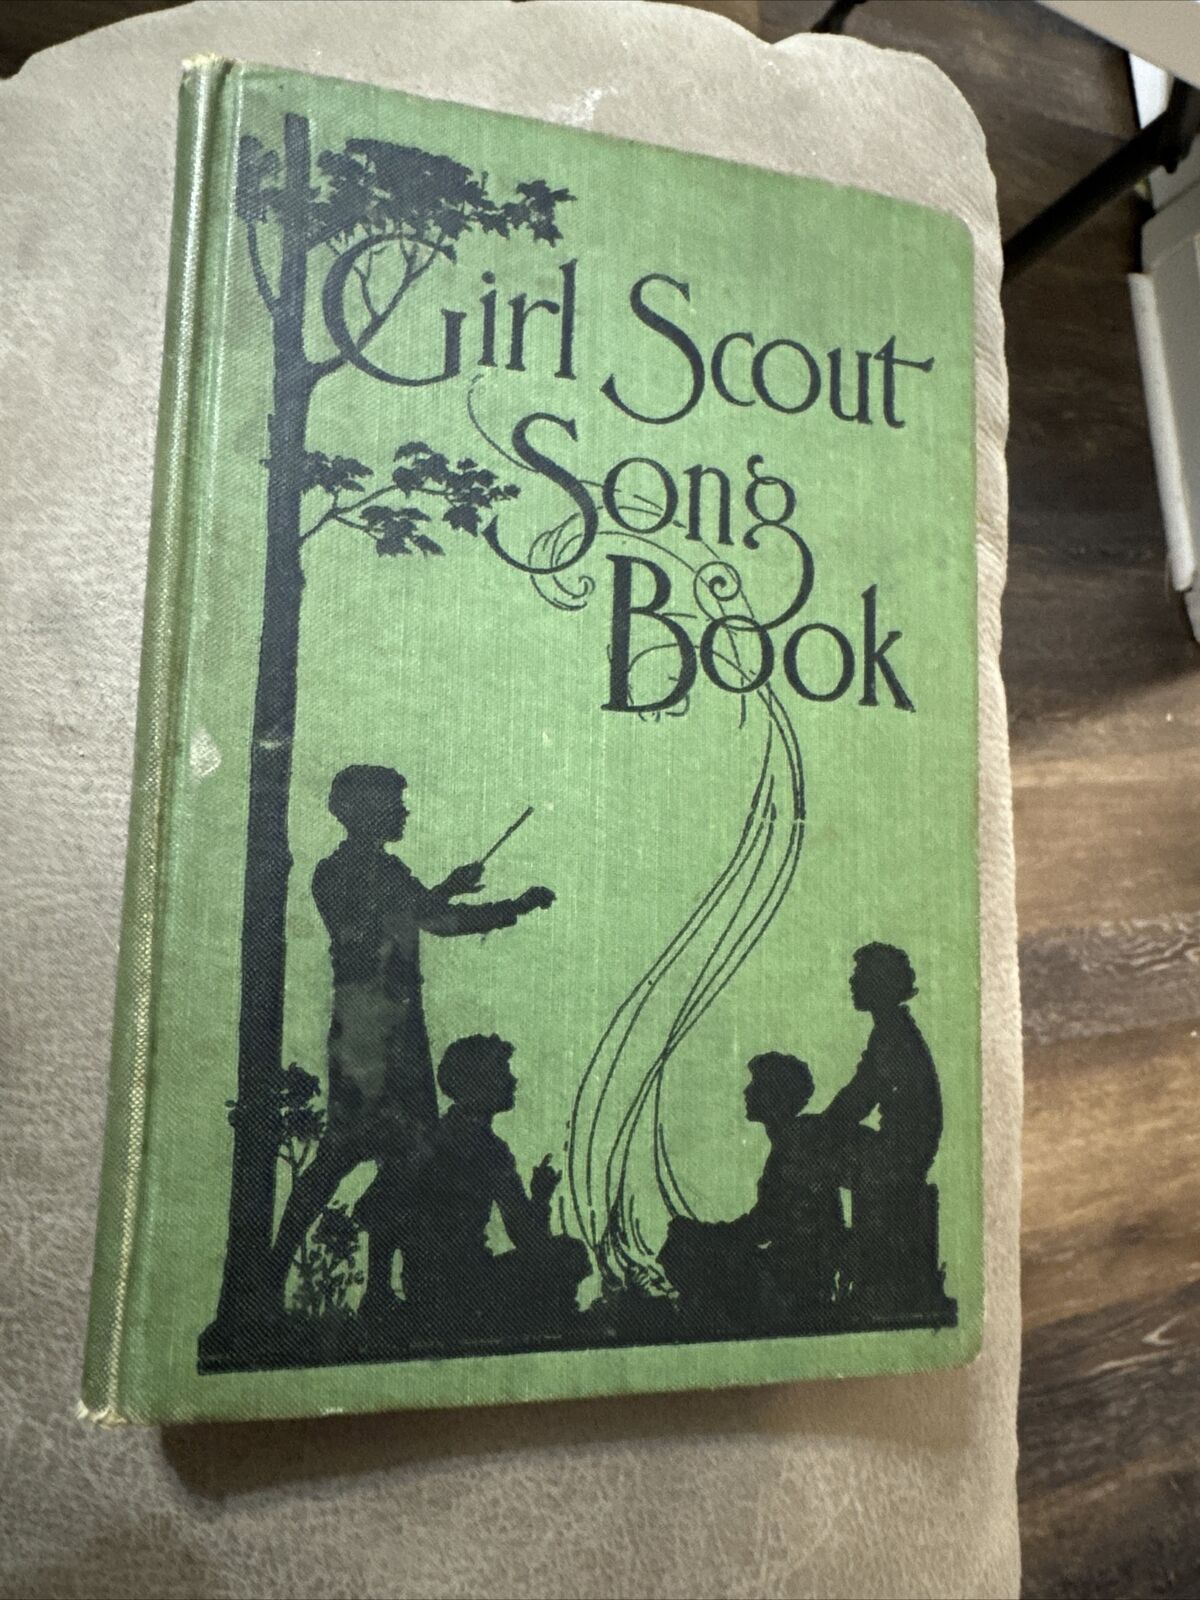 Rare VTG Antique Girl Scout Song Book - revised edition 1925-1929 hardcover